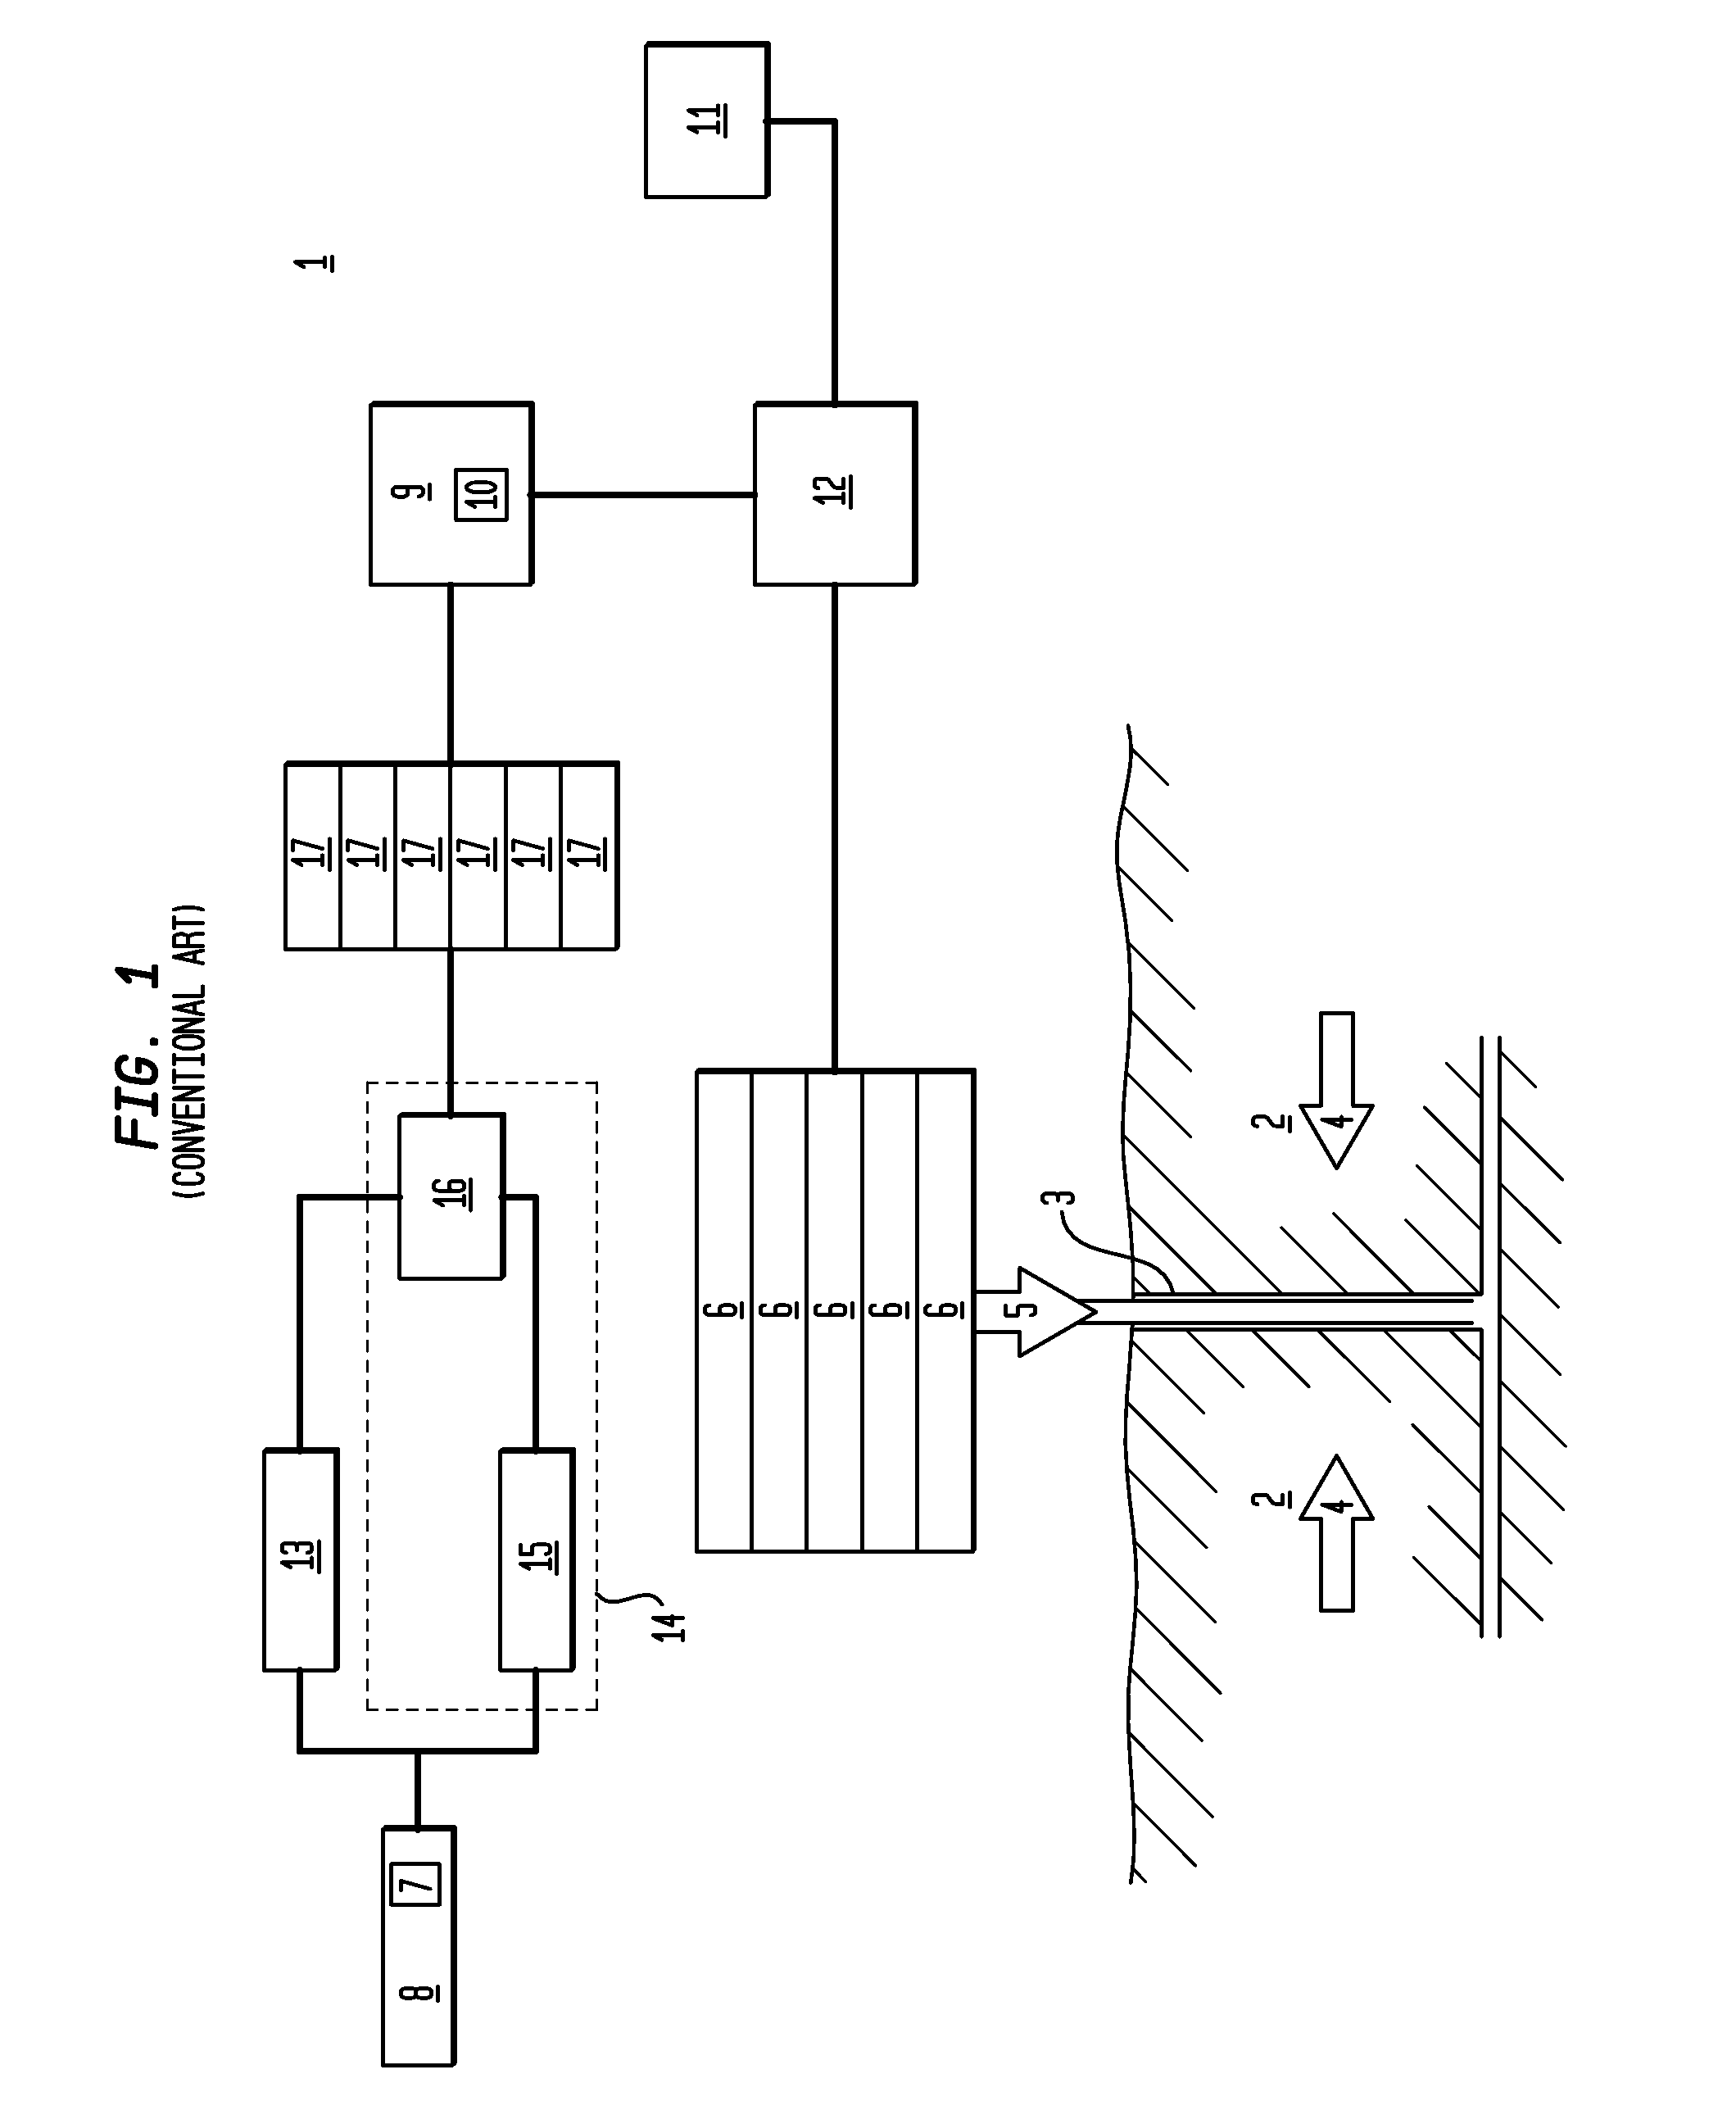 System to heat water for hydraulic fracturing